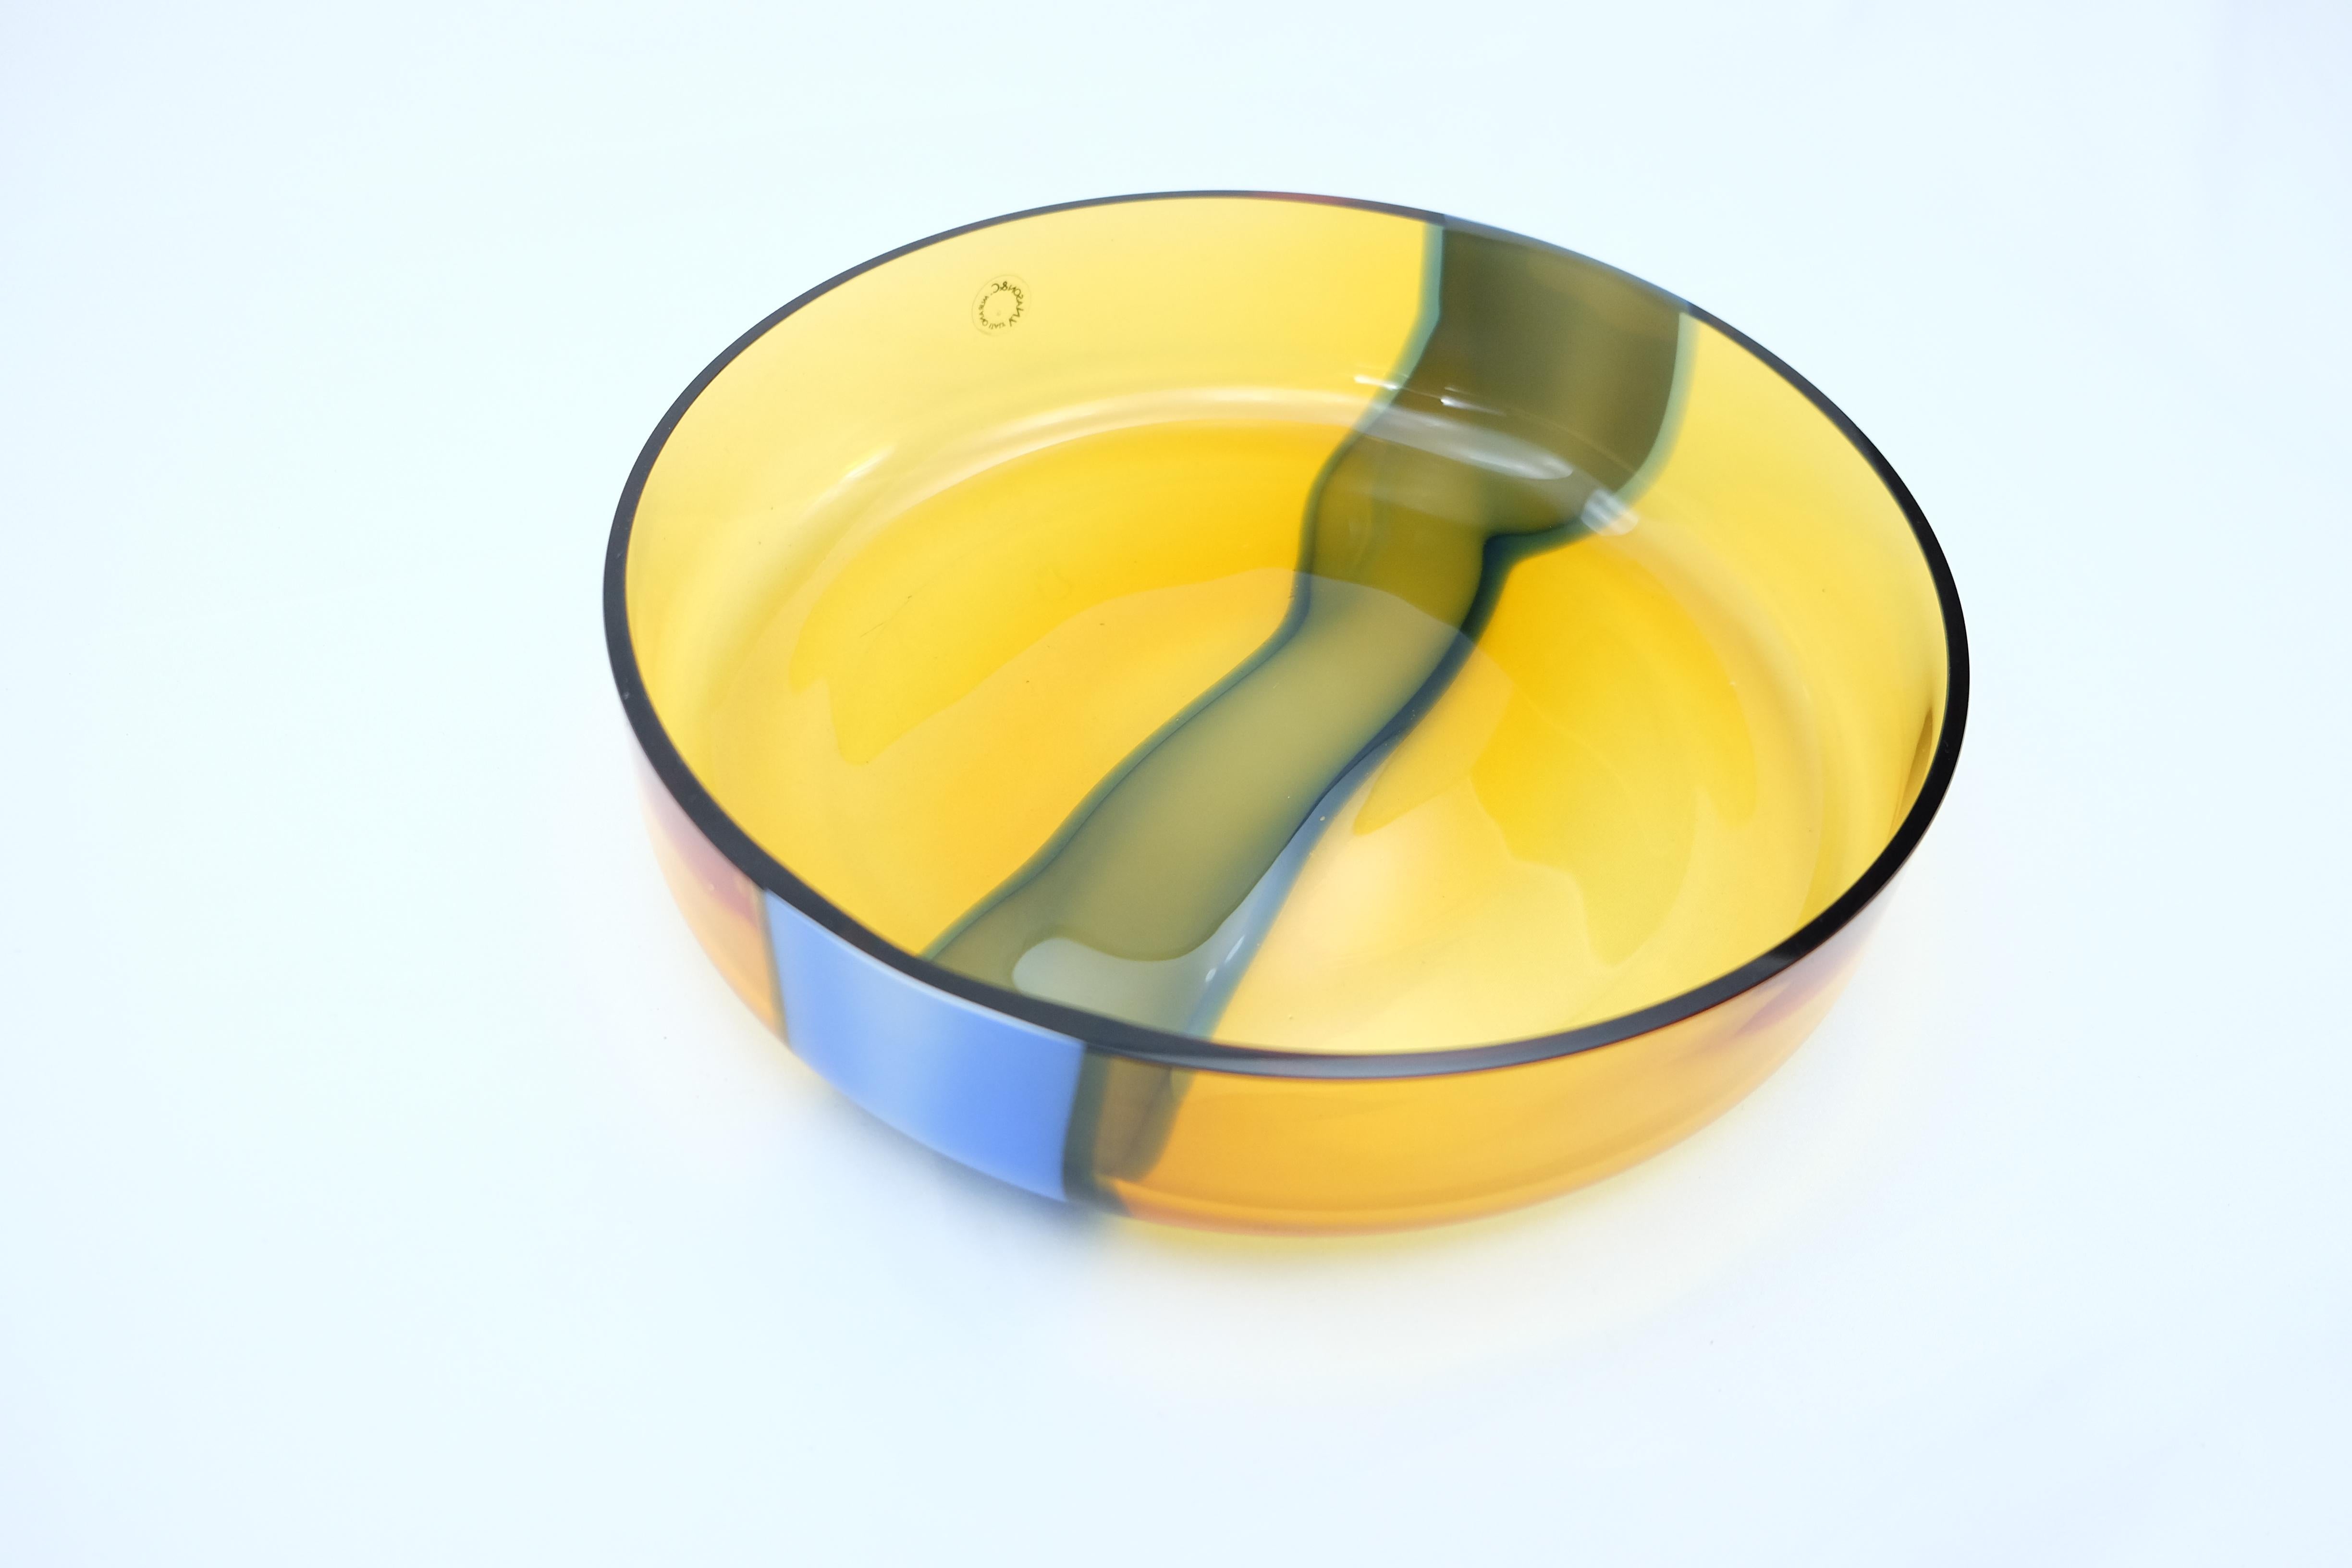 Offered for sale is a new unused yellow and blue Murano glass bowl by V. Nasson & Co. Vincenzo Nason established his glassworks, Vincenzo Nason & Cie (VNC) on the island of Murano, Venice, Italy in 1967, after having previously worked at Venini. The